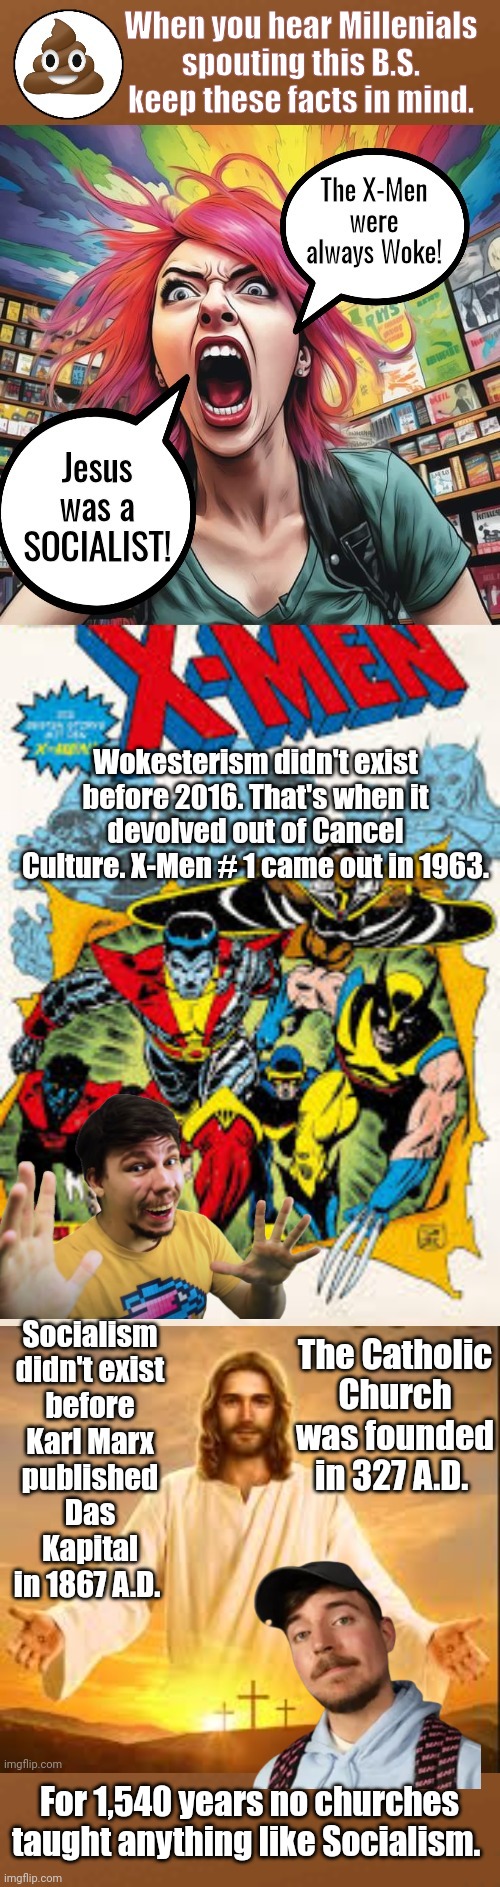 Jesus wasn't a Socialist and the X-Men weren't woke | When you hear Millenials spouting this B.S. keep these facts in mind. Wokesterism didn't exist before 2016. That's when it devolved out of Cancel Culture. X-Men # 1 came out in 1963. Socialism didn't exist before Karl Marx published Das Kapital in 1867 A.D. The Catholic Church was founded in 327 A.D. For 1,540 years no churches taught anything like Socialism. | image tagged in x-men,jesus,history,mr beast,reality check | made w/ Imgflip meme maker